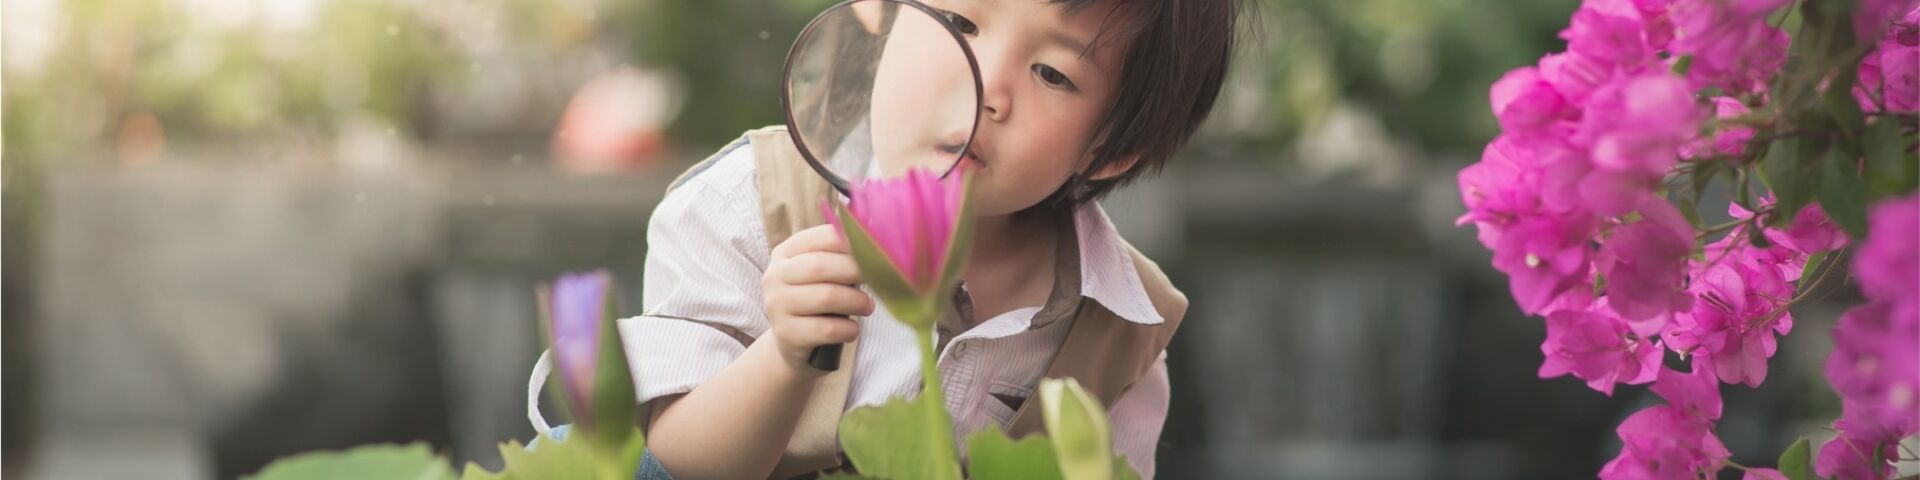 Young person looking intently at a pink flower through a magnifying glass